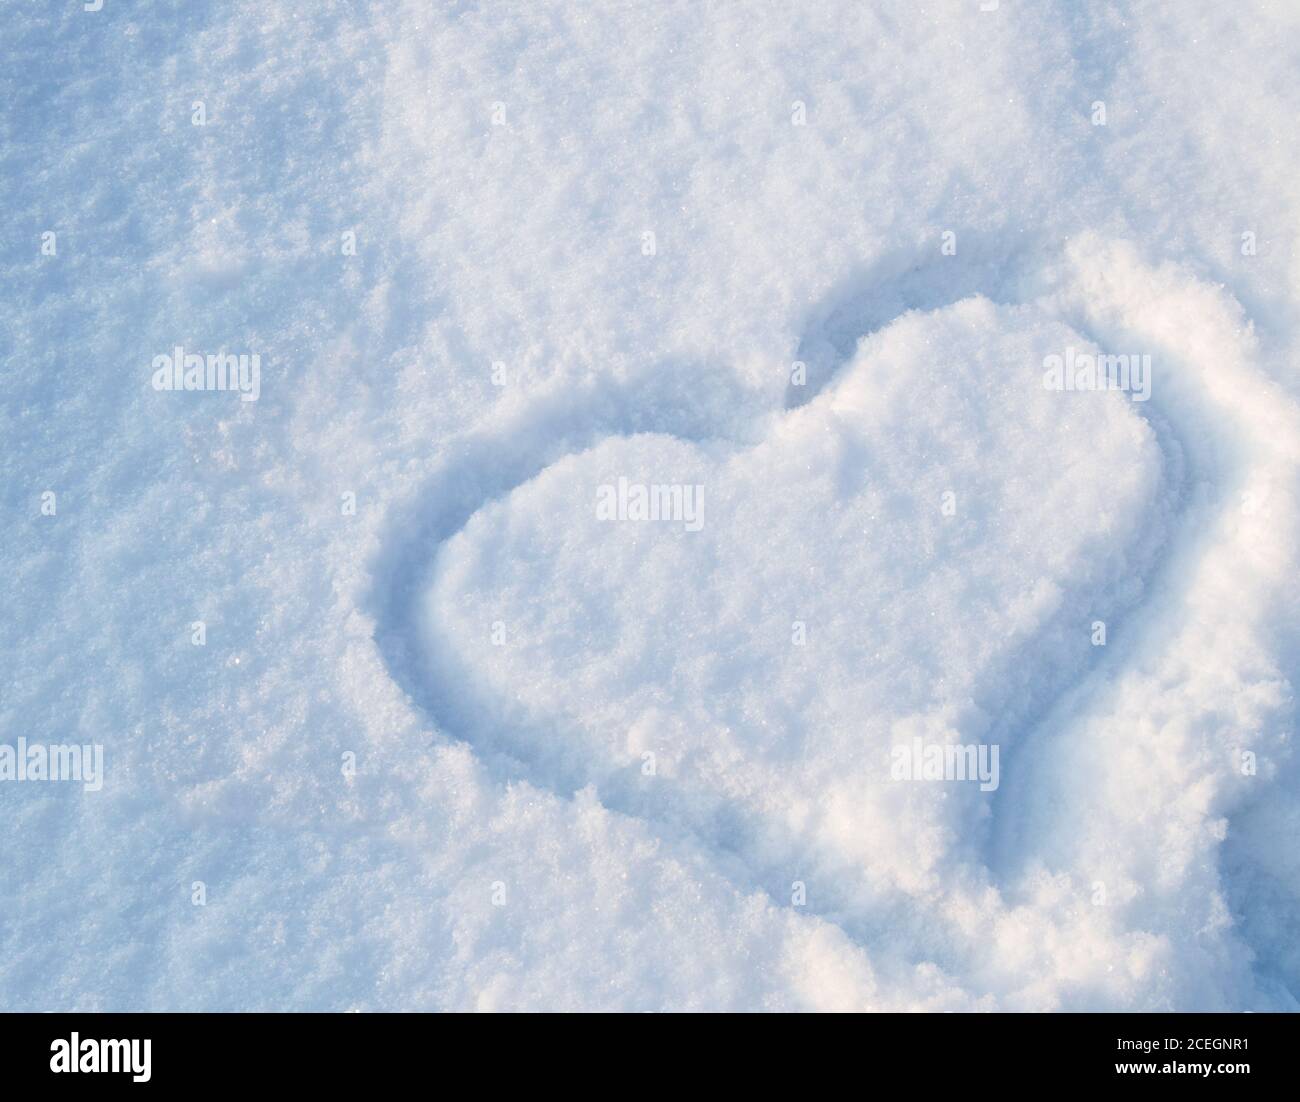 Romantic Heart In The Snow Drawing For Valentine S Day And Christmas Snow Texture Stock Photo Alamy